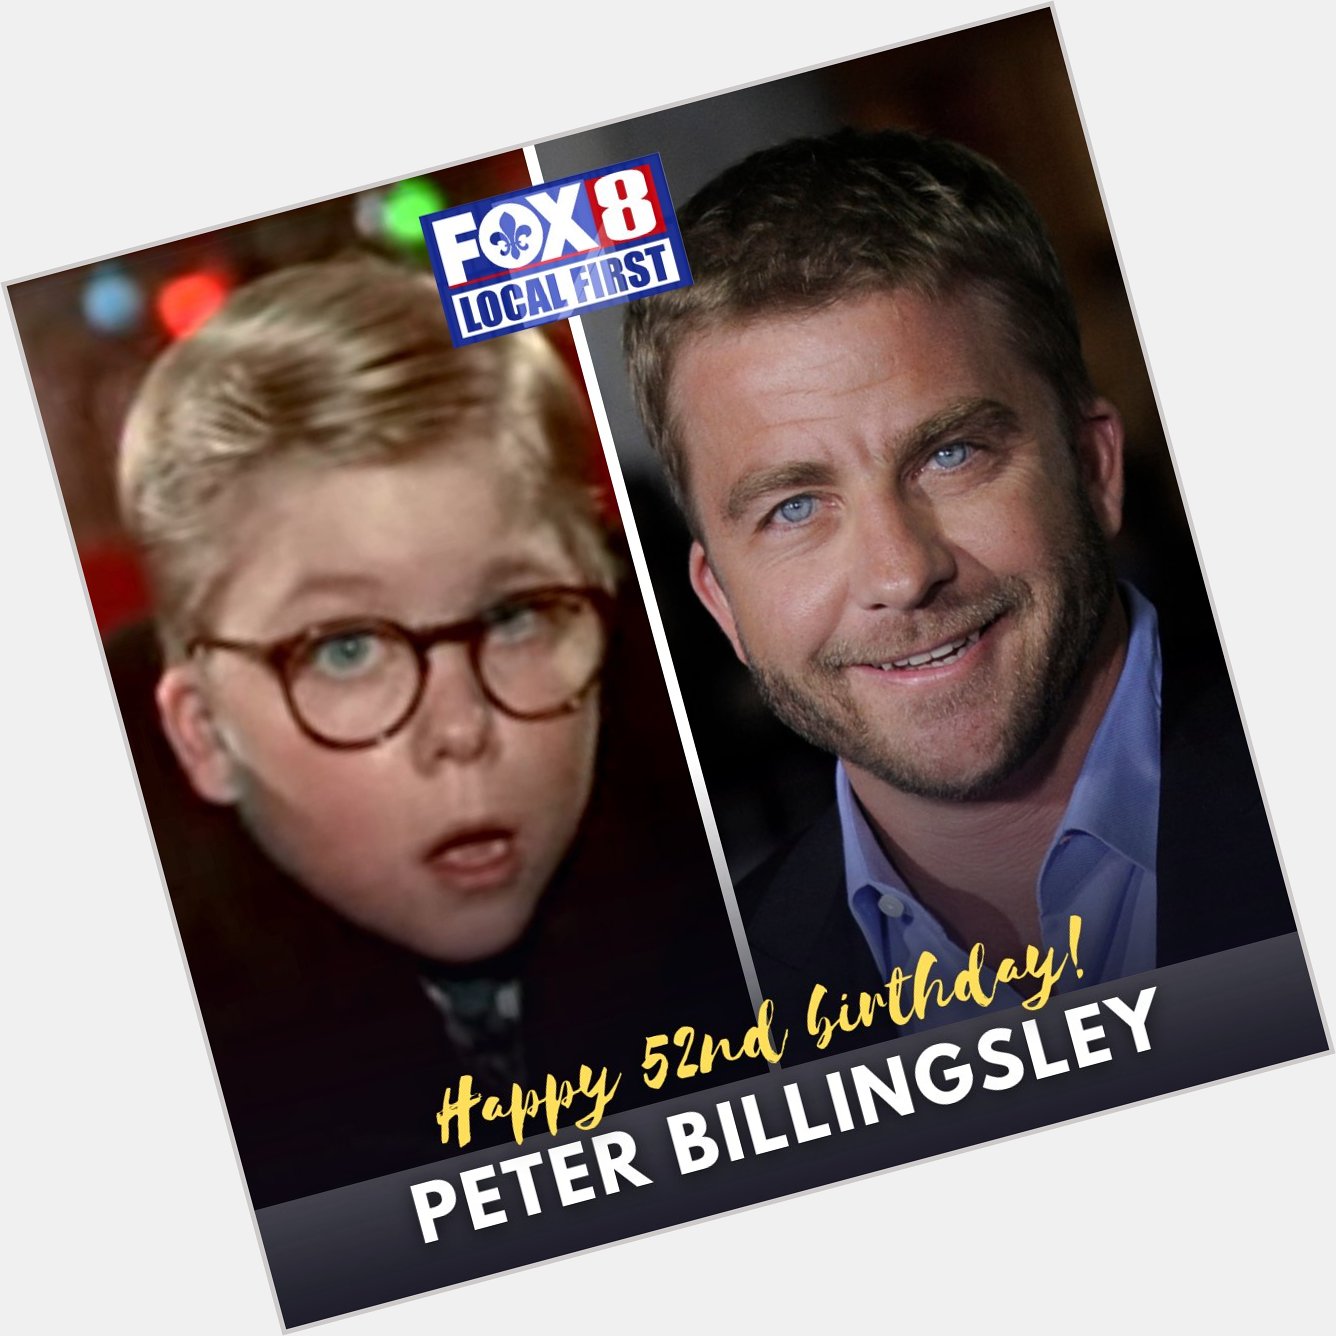 Happy birthday to actor-director Peter Billingsley (Ralphie from \A Christmas Story\), who turned 52 on Sunday! 